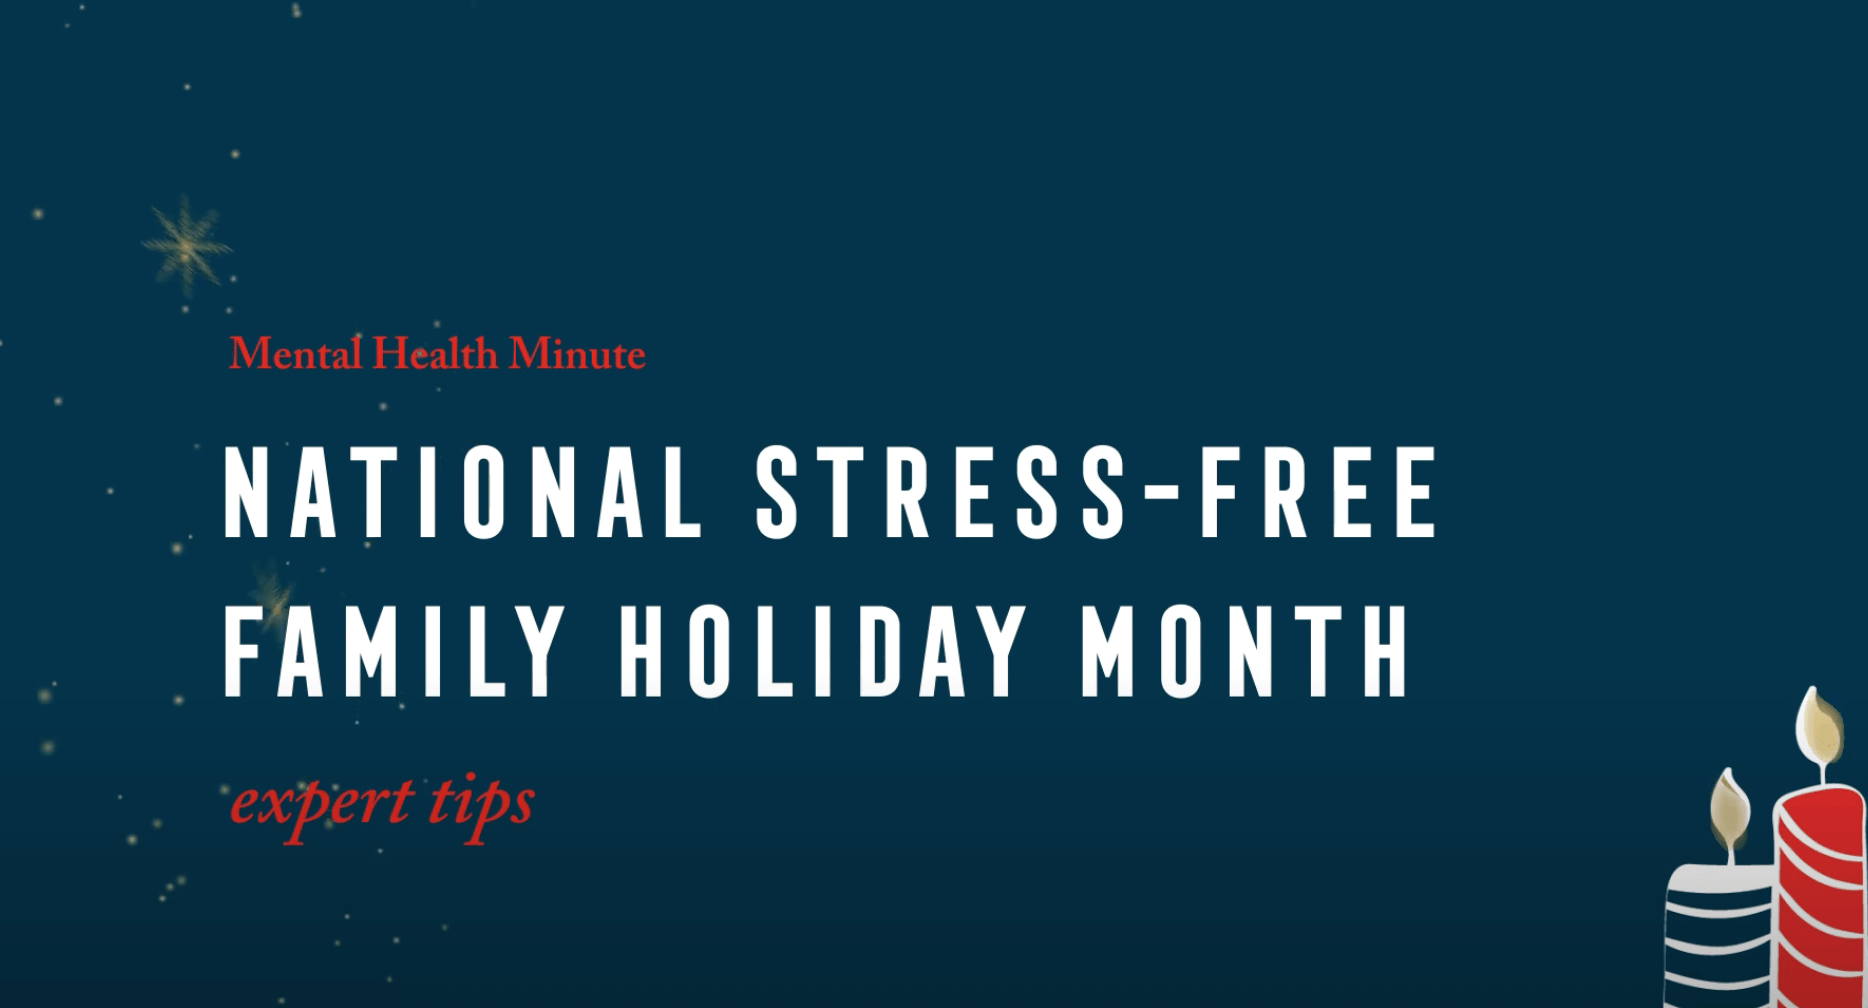 National Stress-Free Family Holiday Month